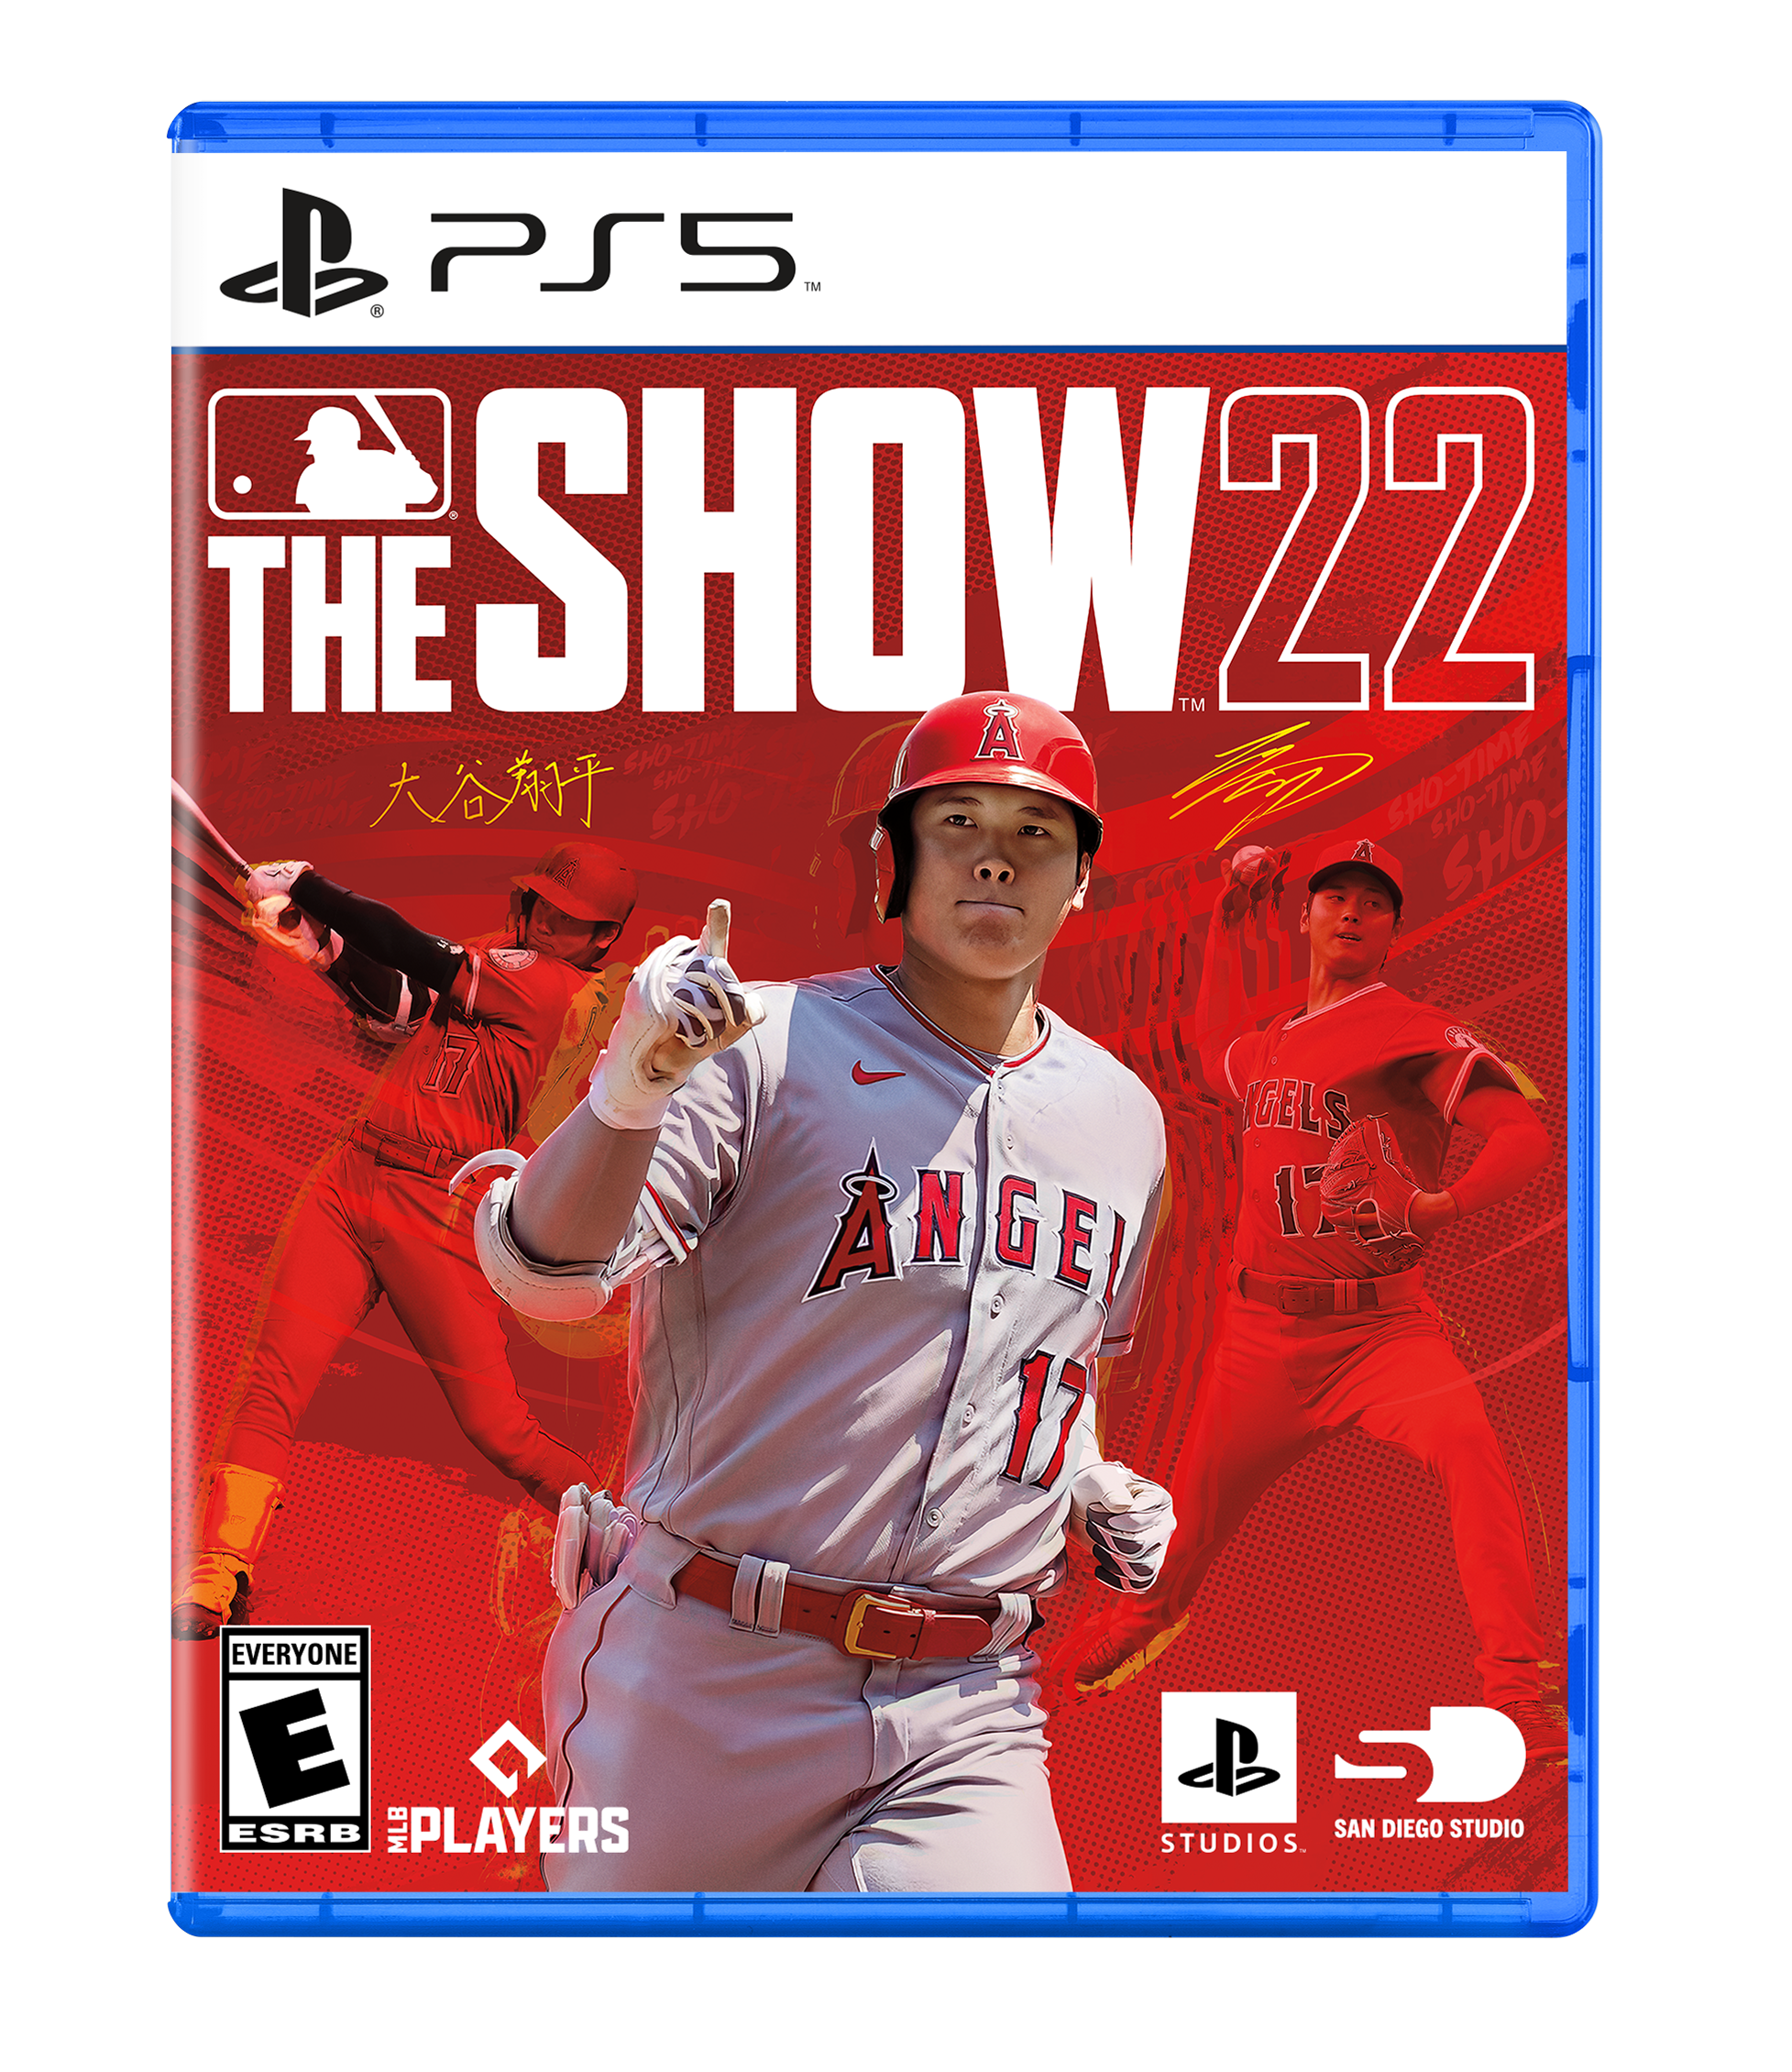 Steil waterbestendig thuis MLB The Show 22 - PS5 | PlayStation 5 | GameStop